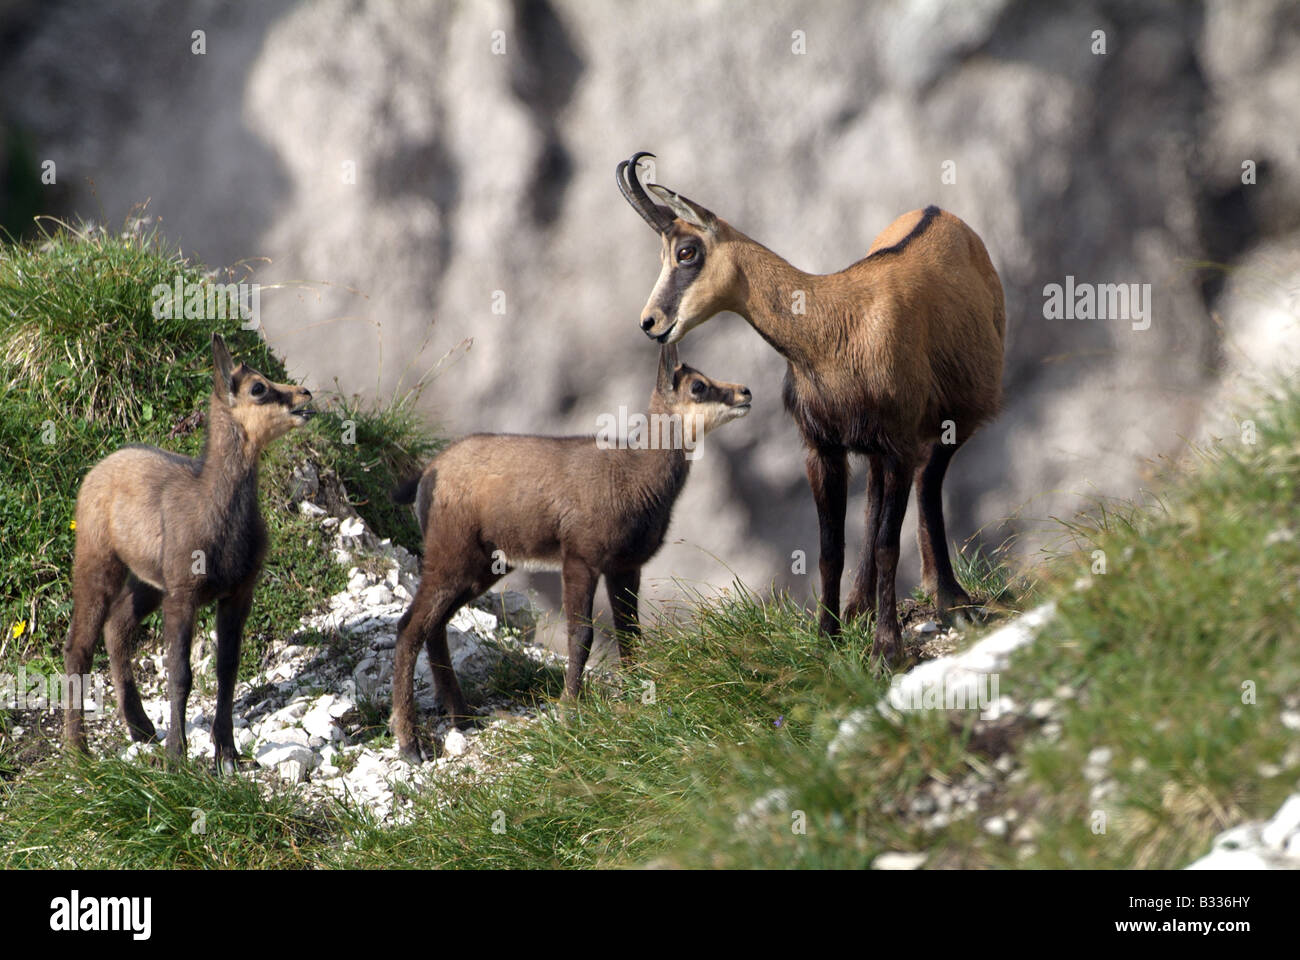 Chamois (Rupicapra rupicapra), female with two young standing on a grassy slope Stock Photo